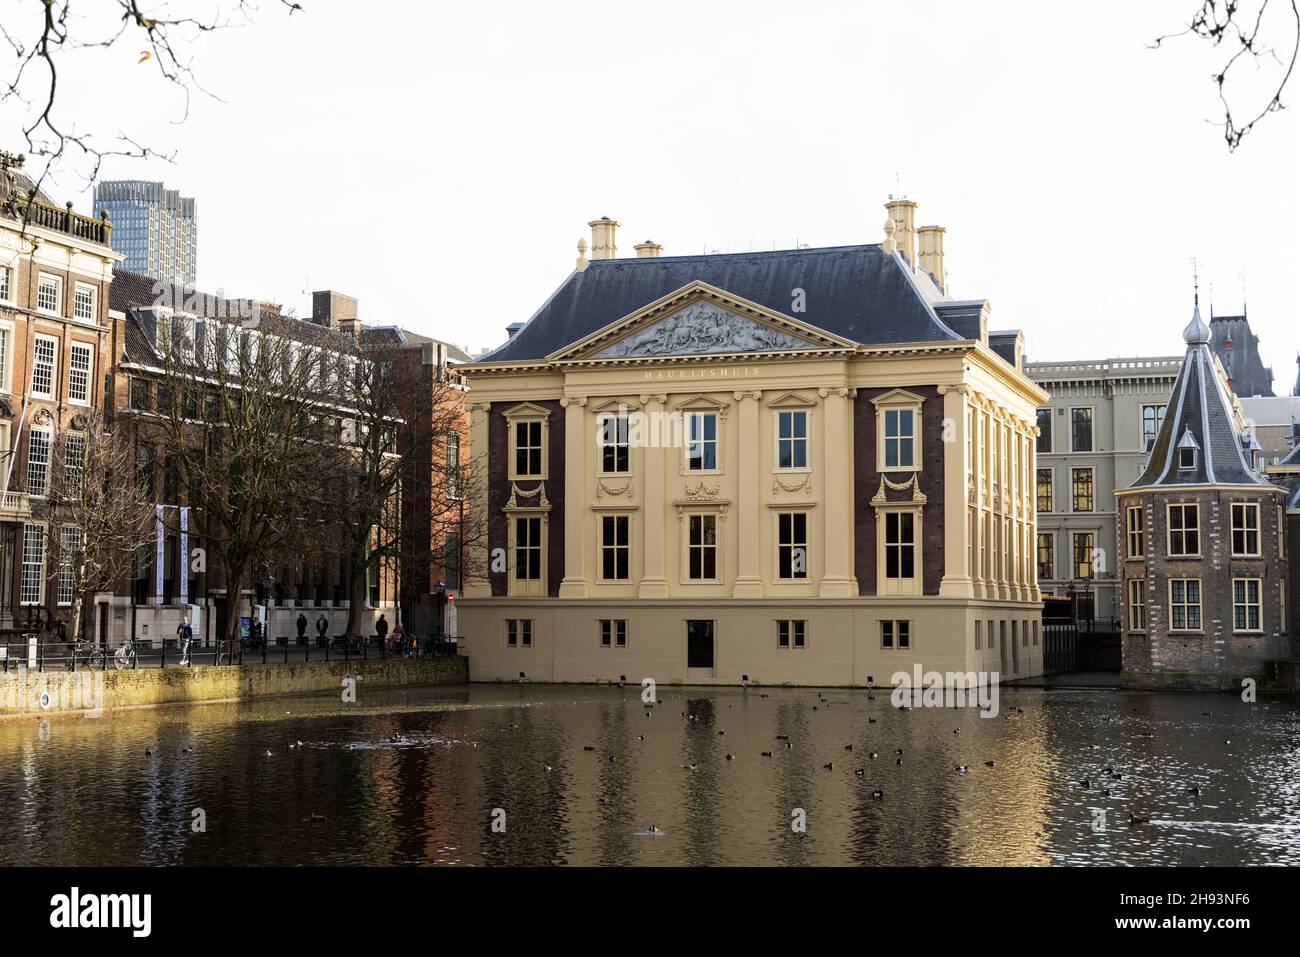 The Mauritshuis art museum in The Hague, Netherlands. Stock Photo